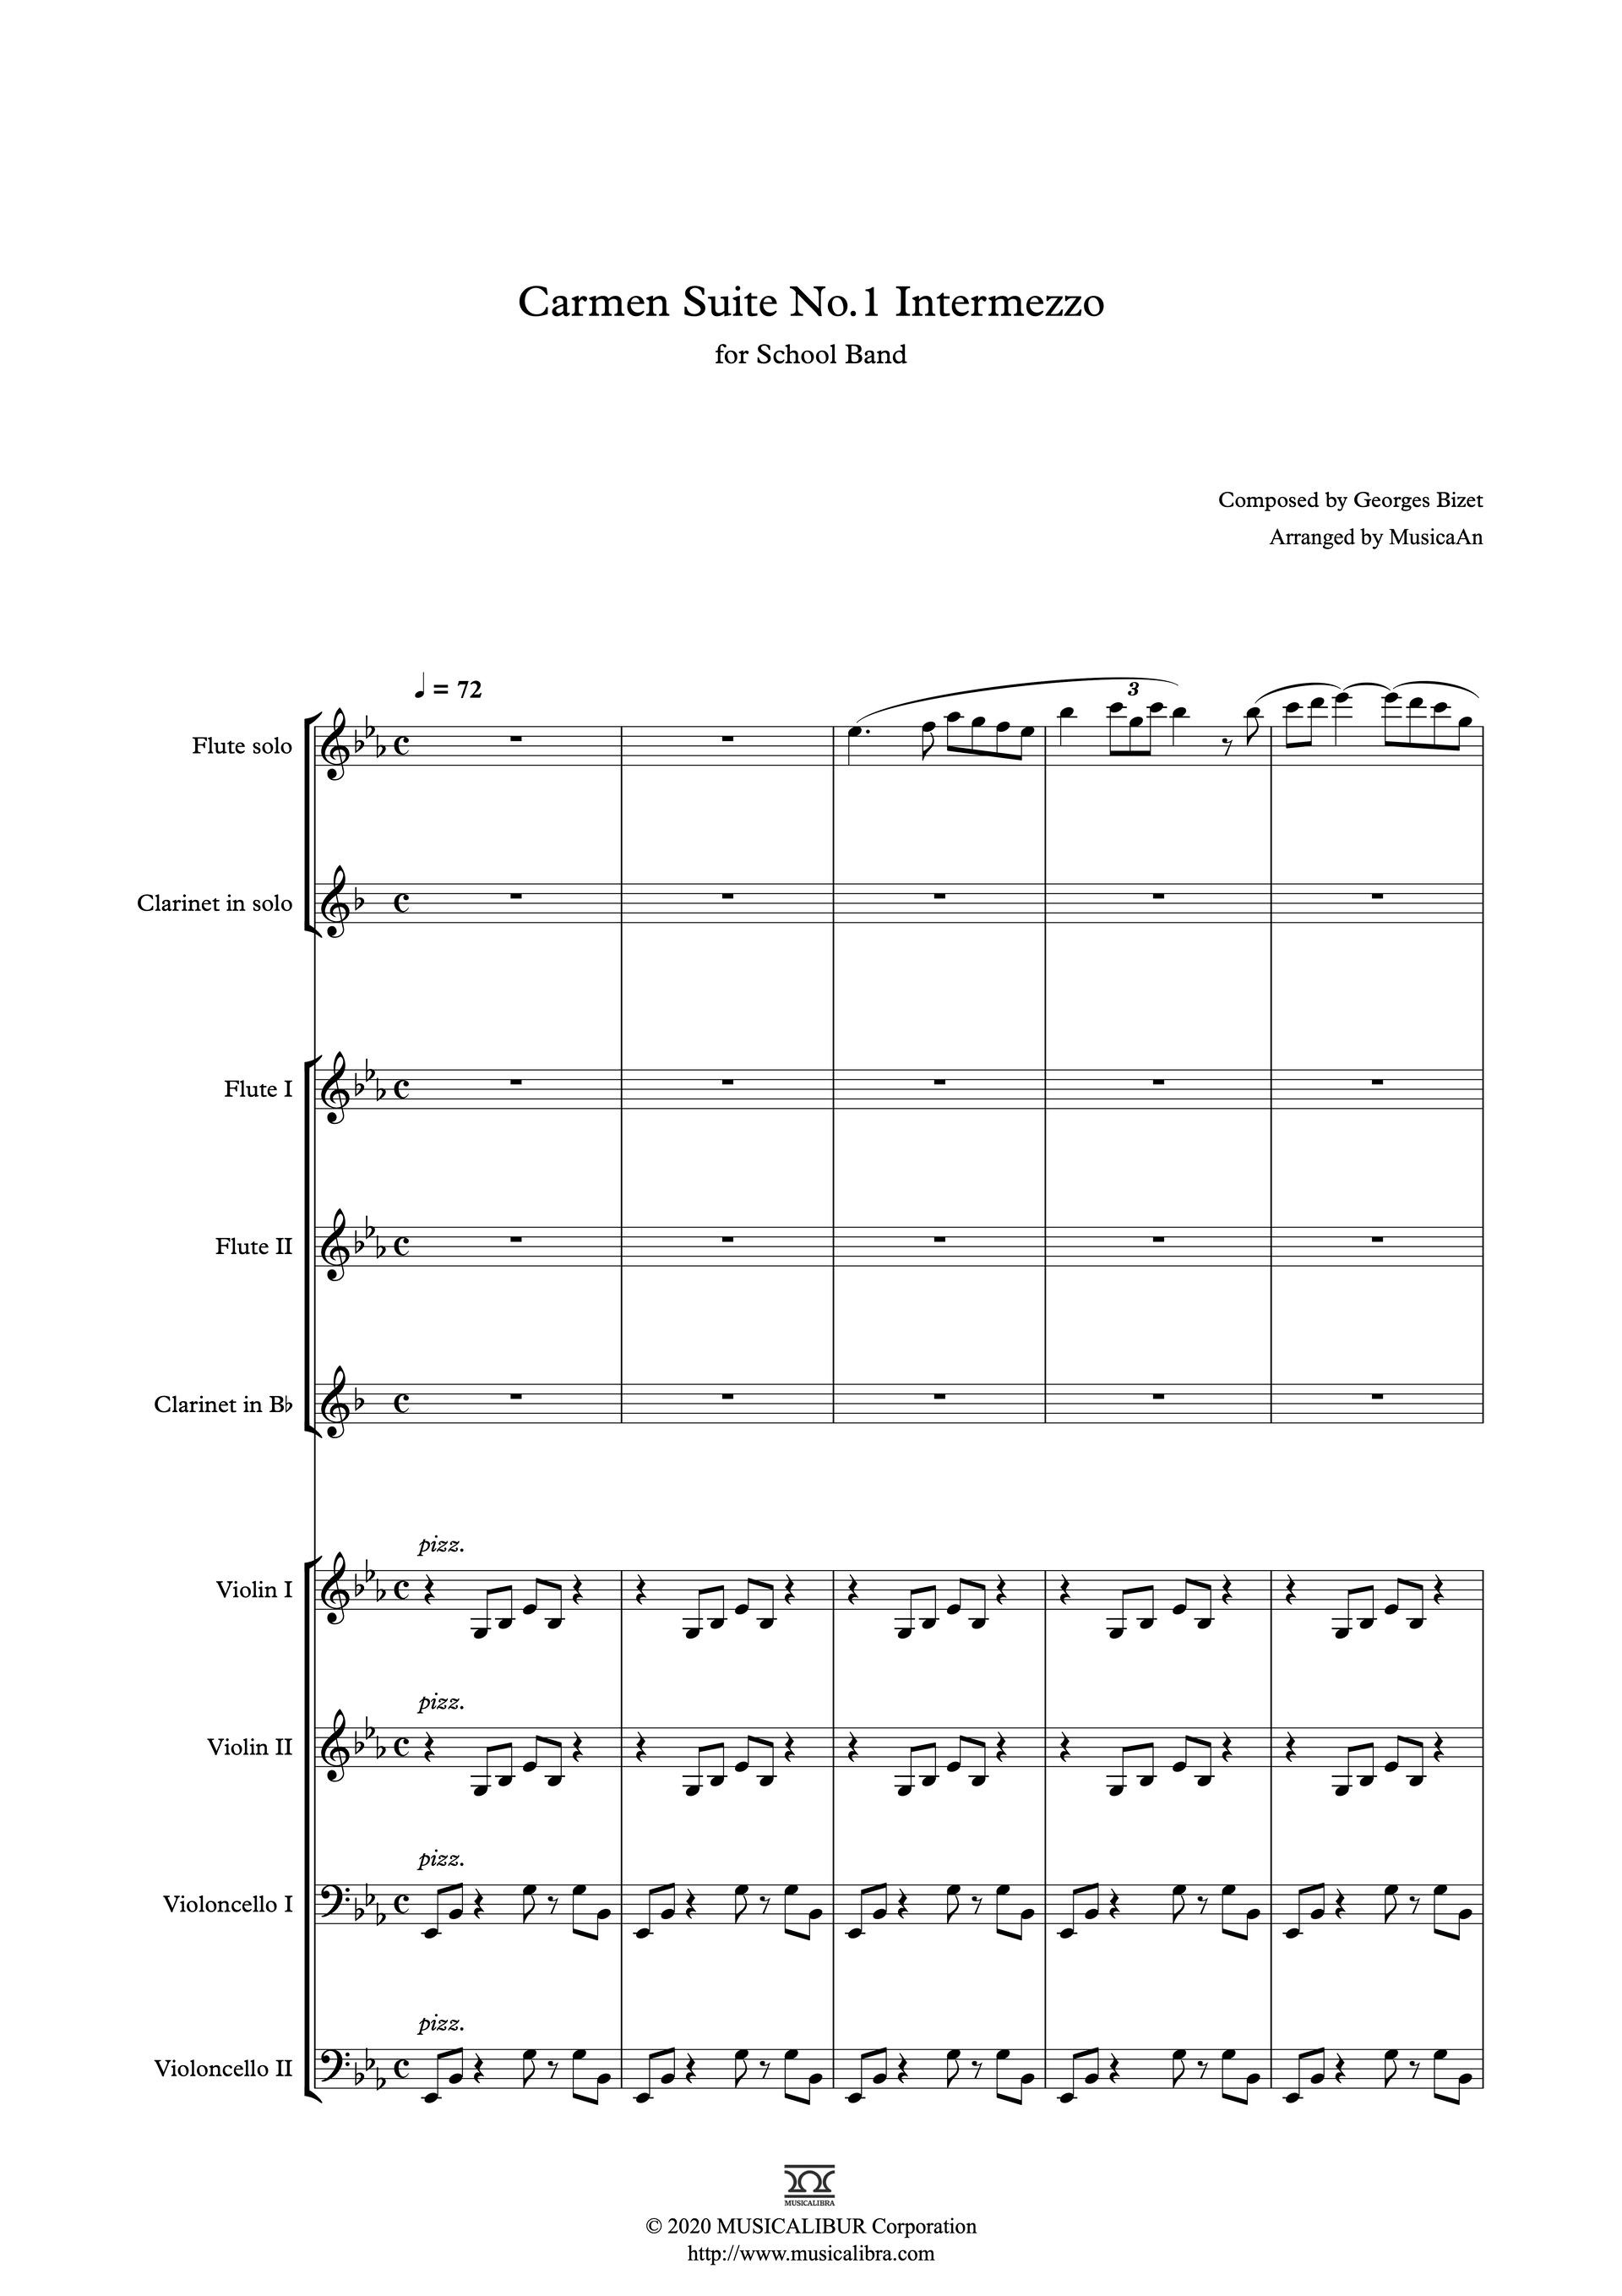 Sheet music of Bijet's Carmen Suite No. 1, Intermezzo arranged for school band preview page 1